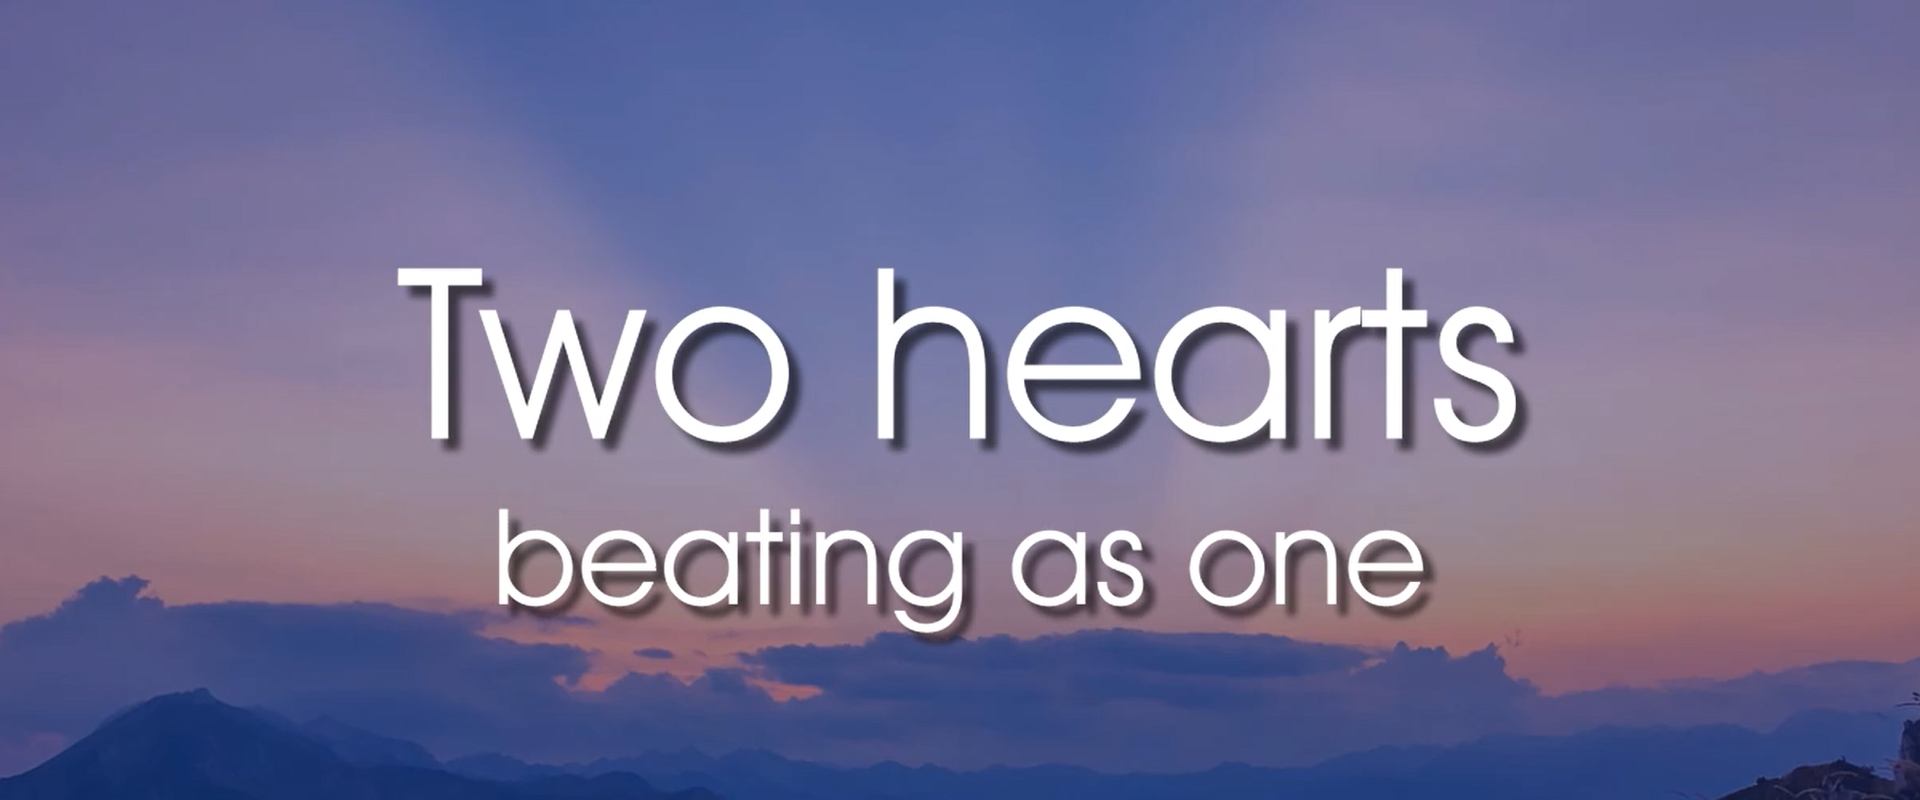 Two hearts beating as one